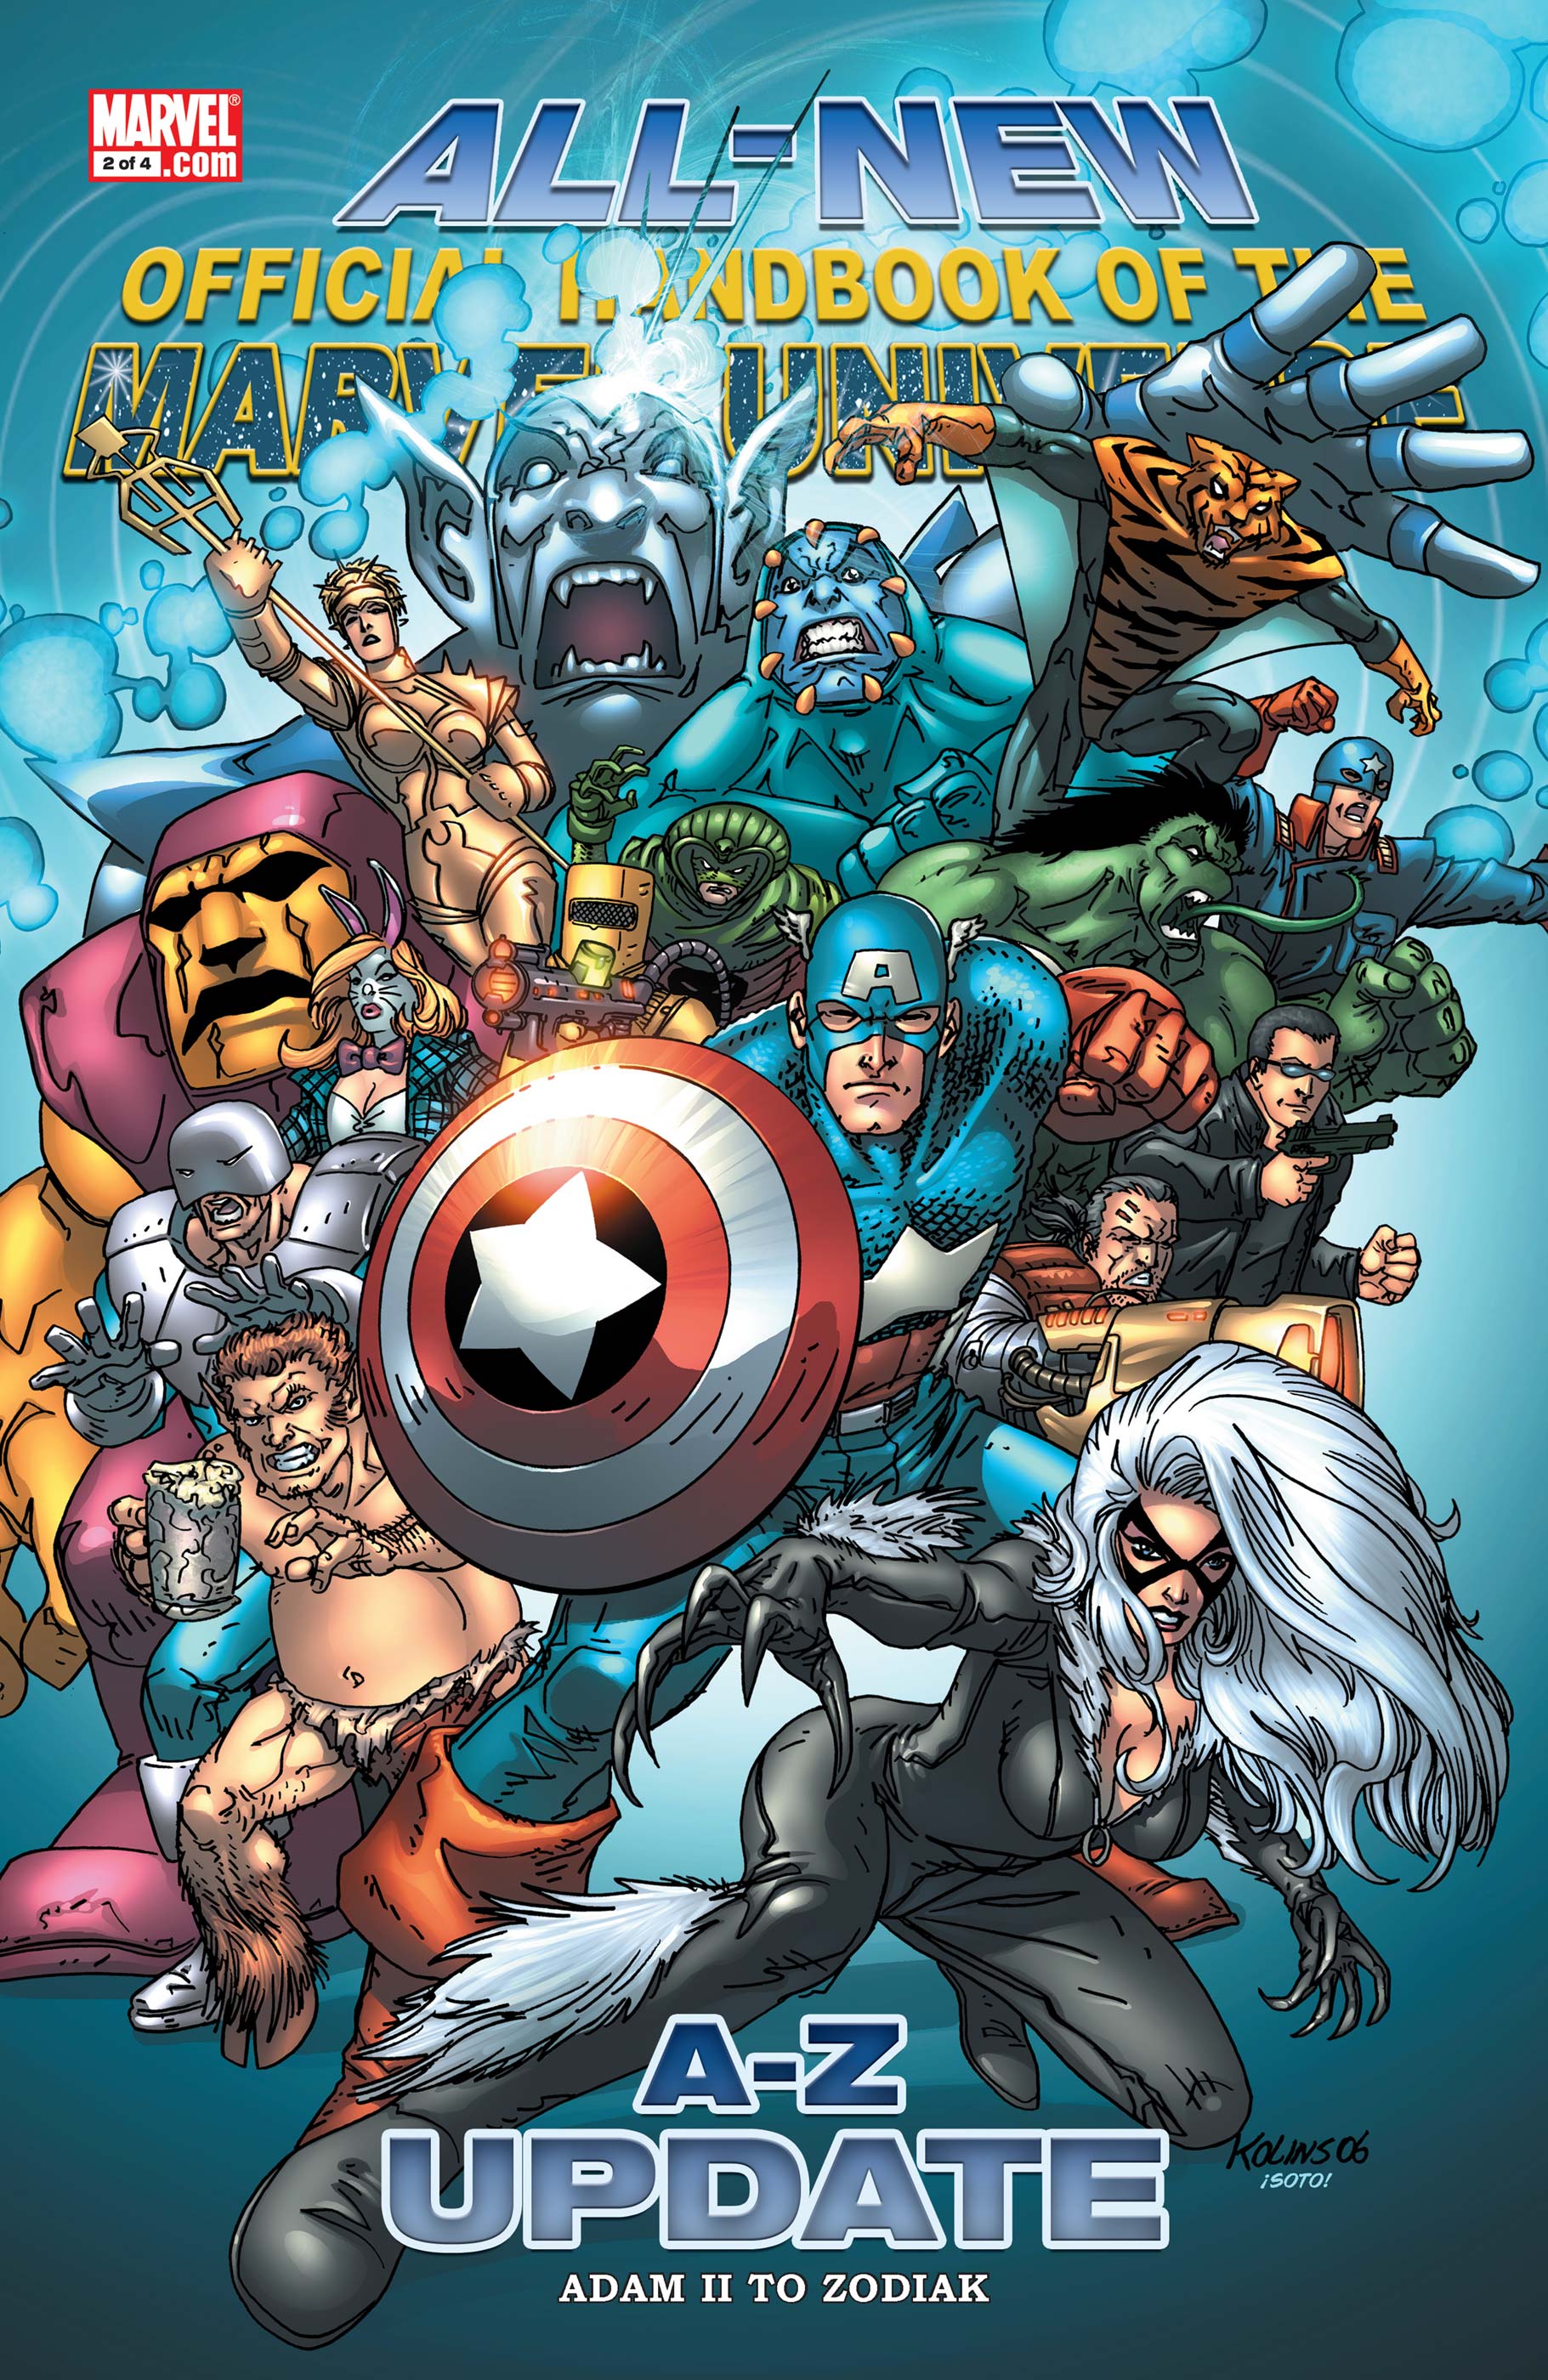 All-New Official Handbook of the Marvel Universe a to Z: Update (2007) #2